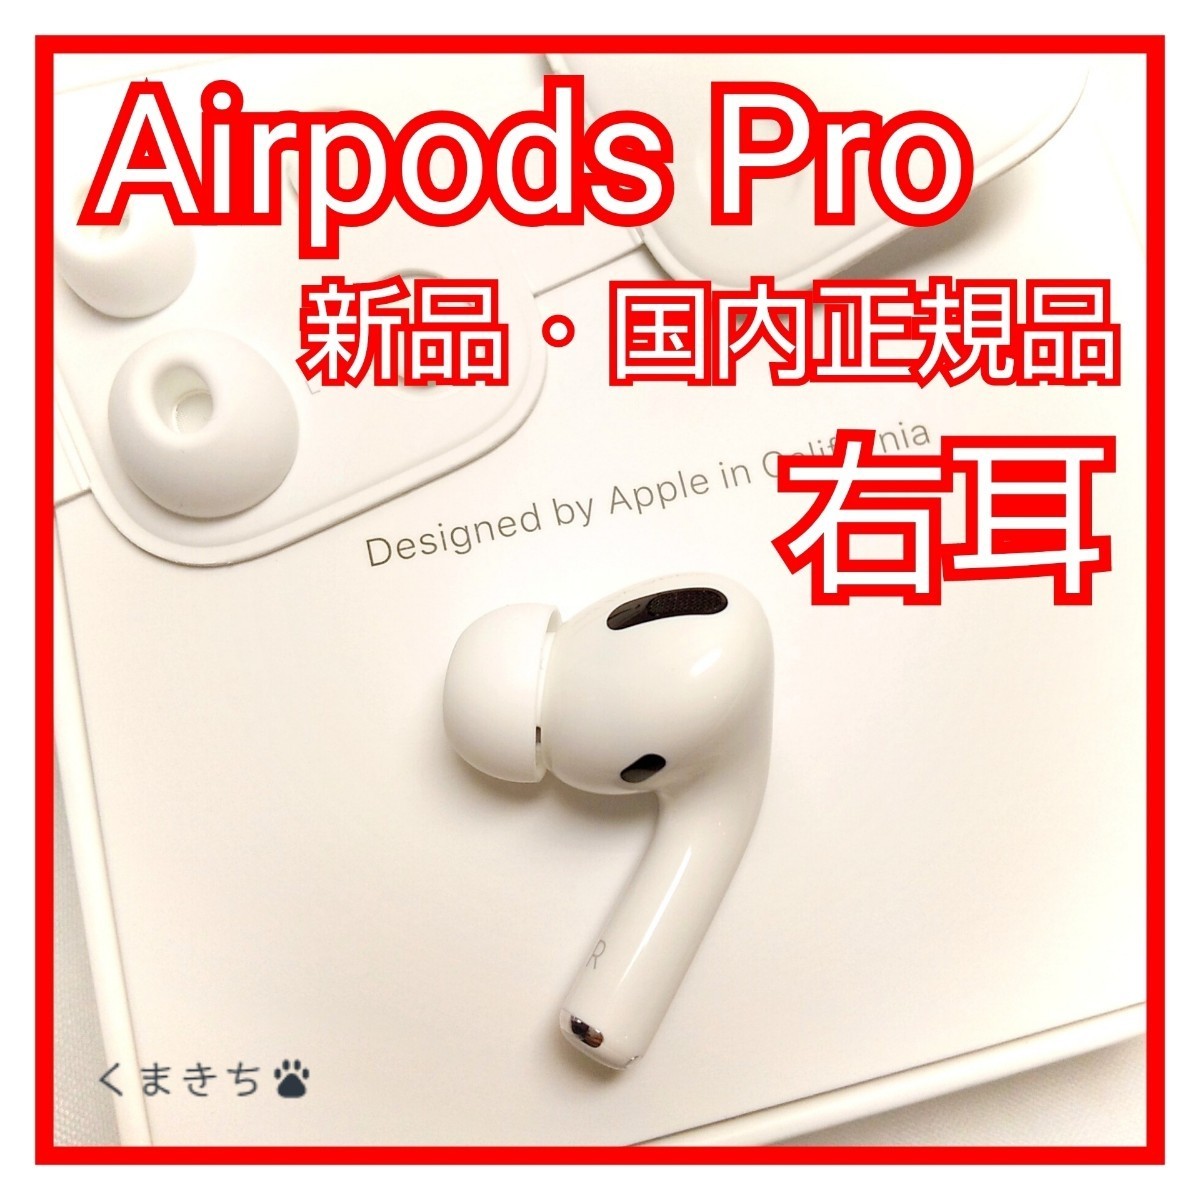 AirPods Pro イヤホン 右耳 のみ 片耳 イヤフォン | accsbgm.org